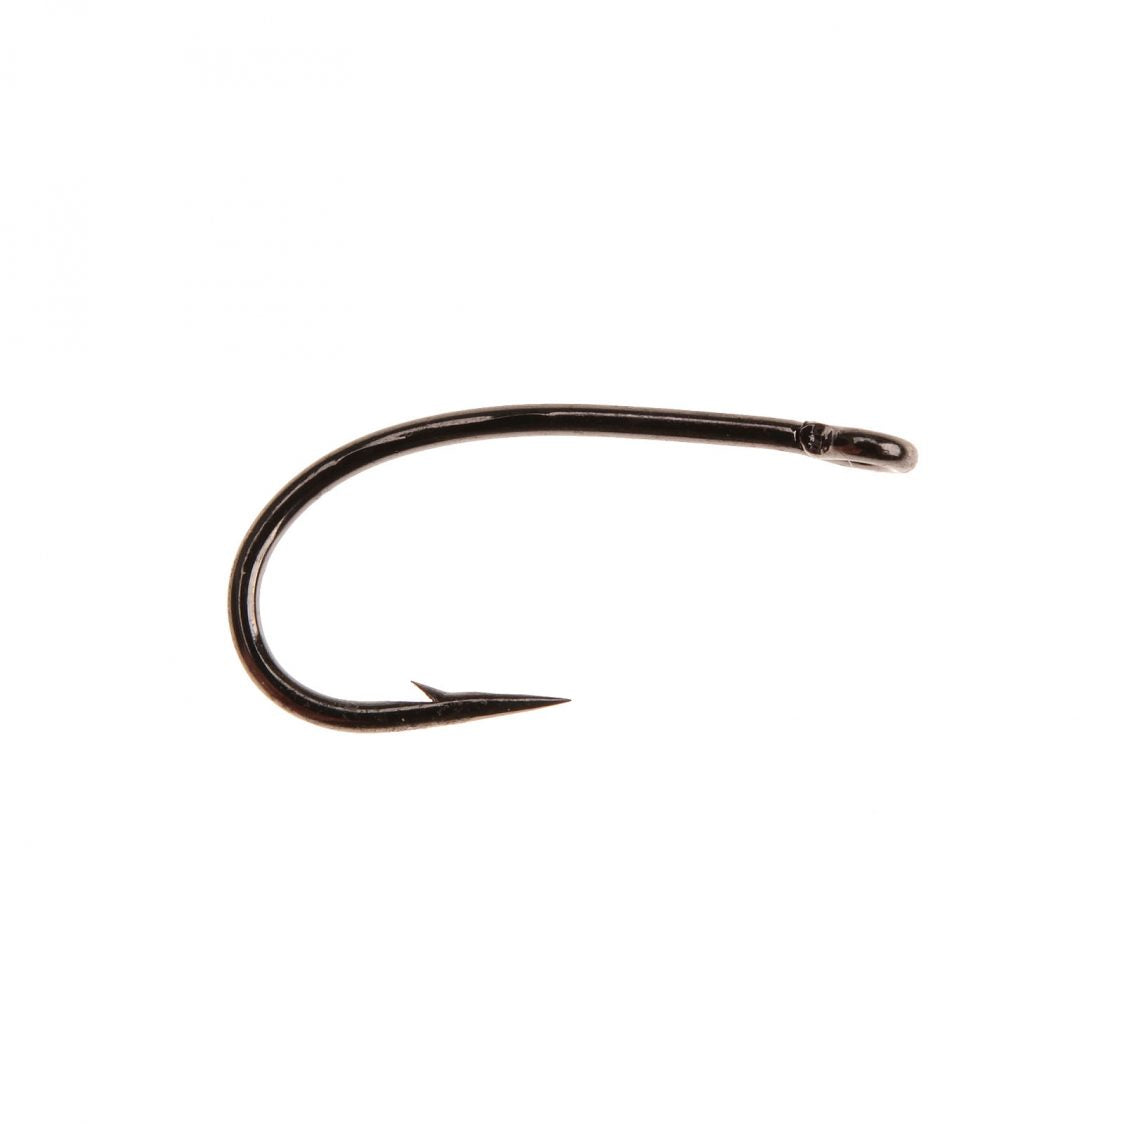 FW510 - Curved Dry Hook, Barbed